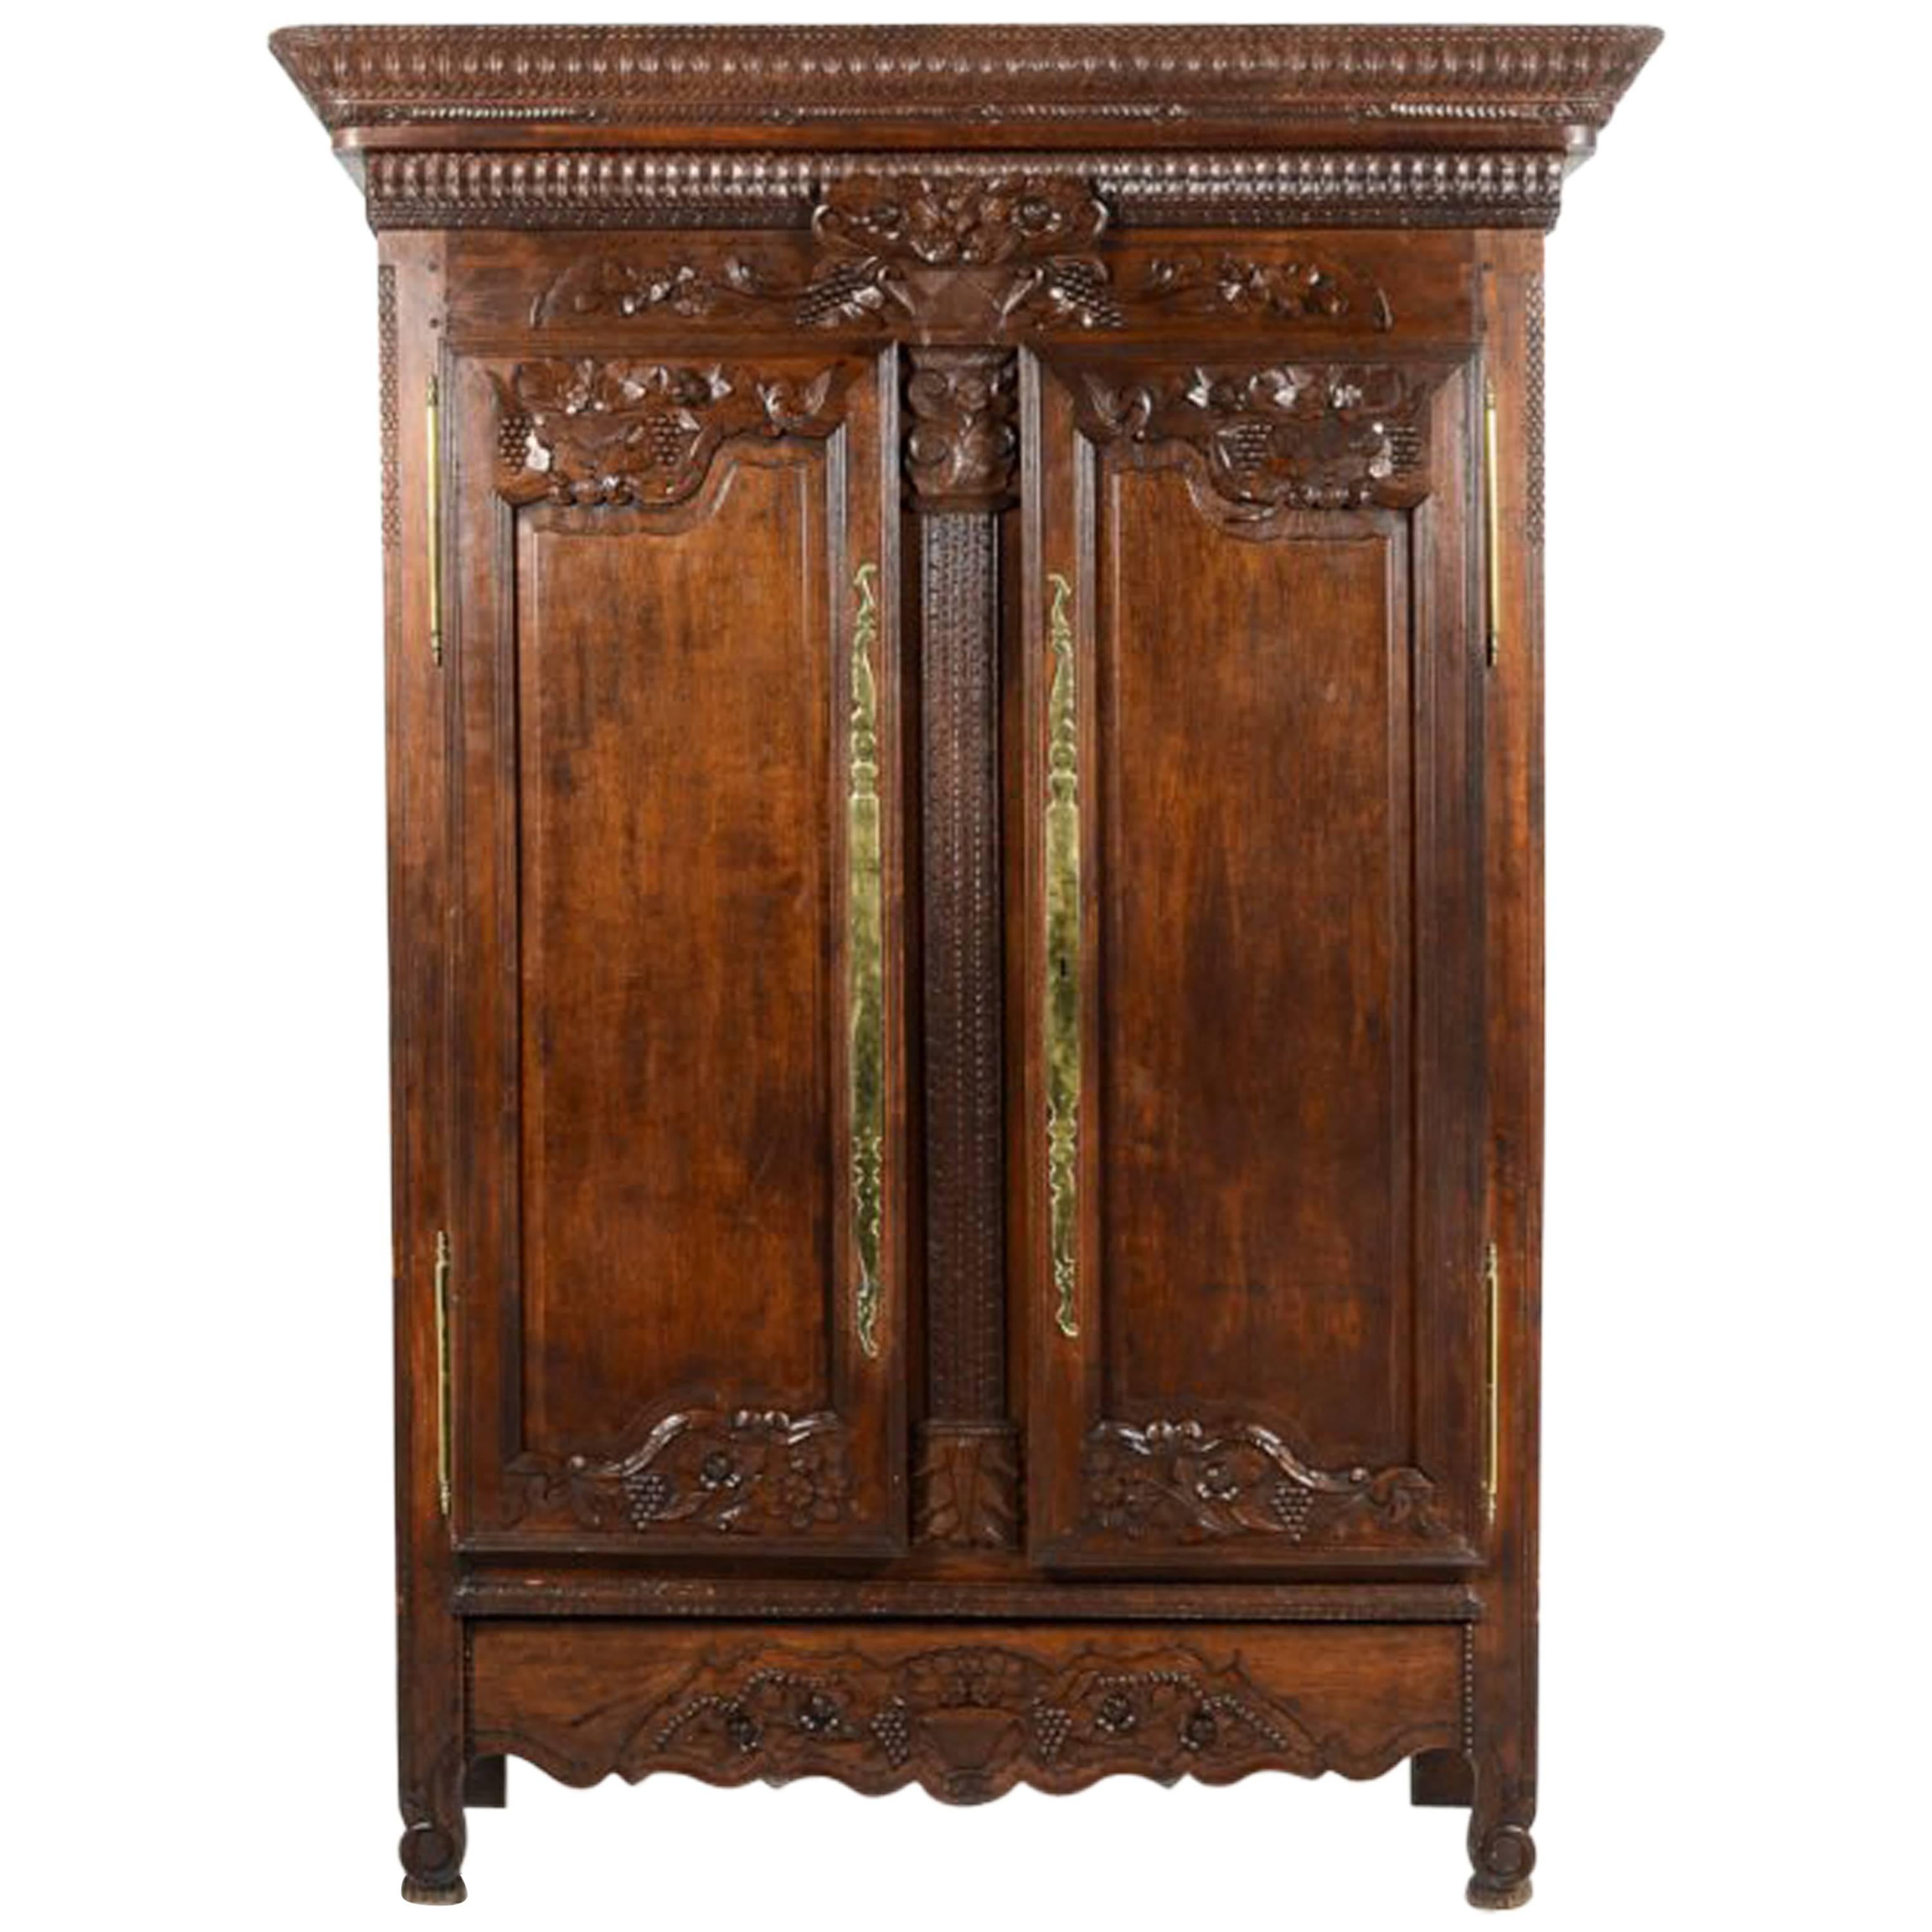 Antique French Hand-Carved "Marriage" Armoire in Oak and Brass, 19th Century